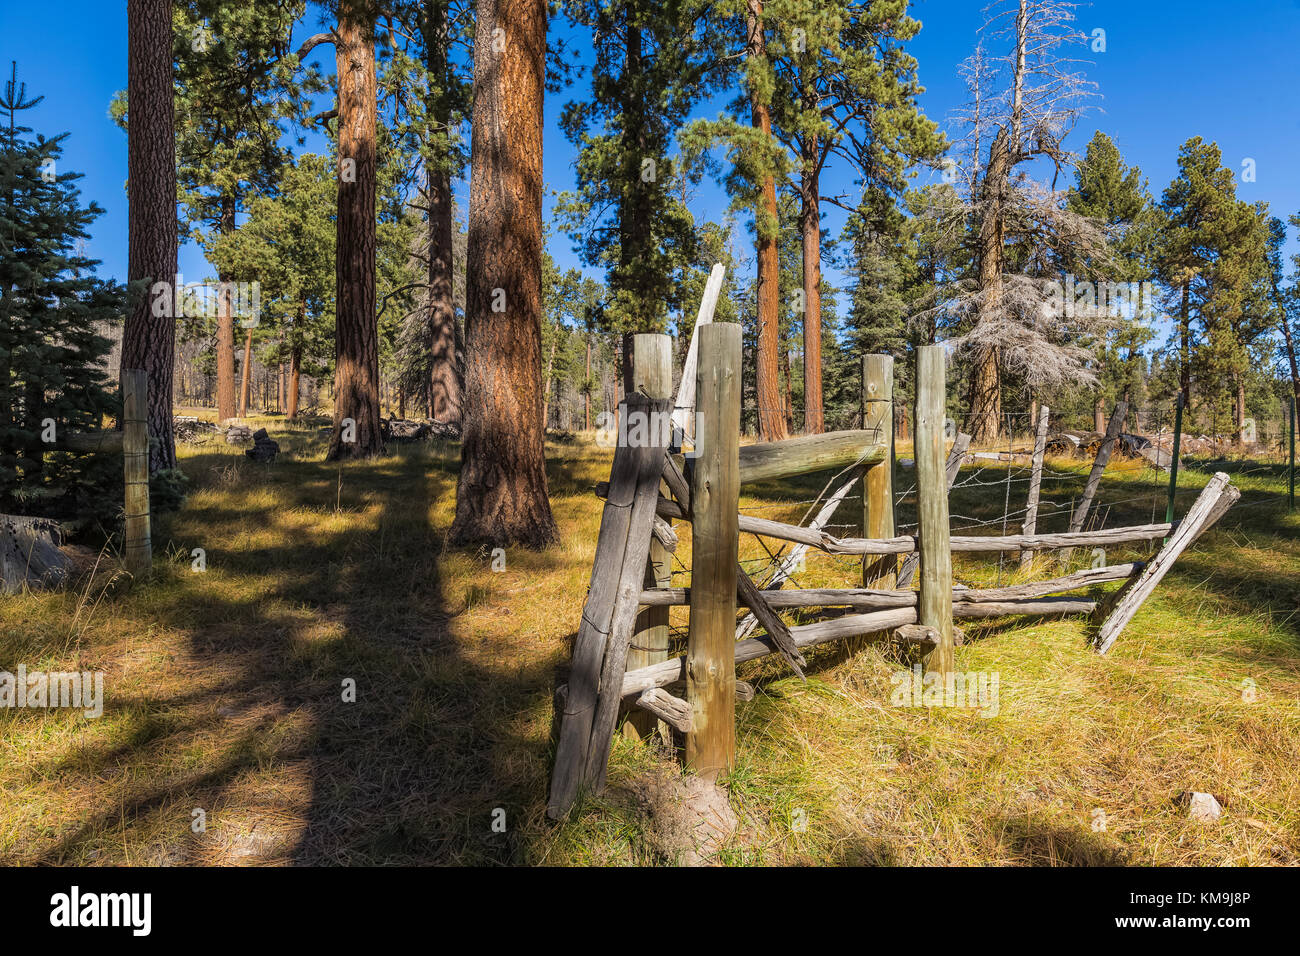 Ponderosa Pines, Pinus ponderosa, and old ranch fence in Valles Caldera National Preserve, a preserve run by the National Park Service, New Mexico, US Stock Photo